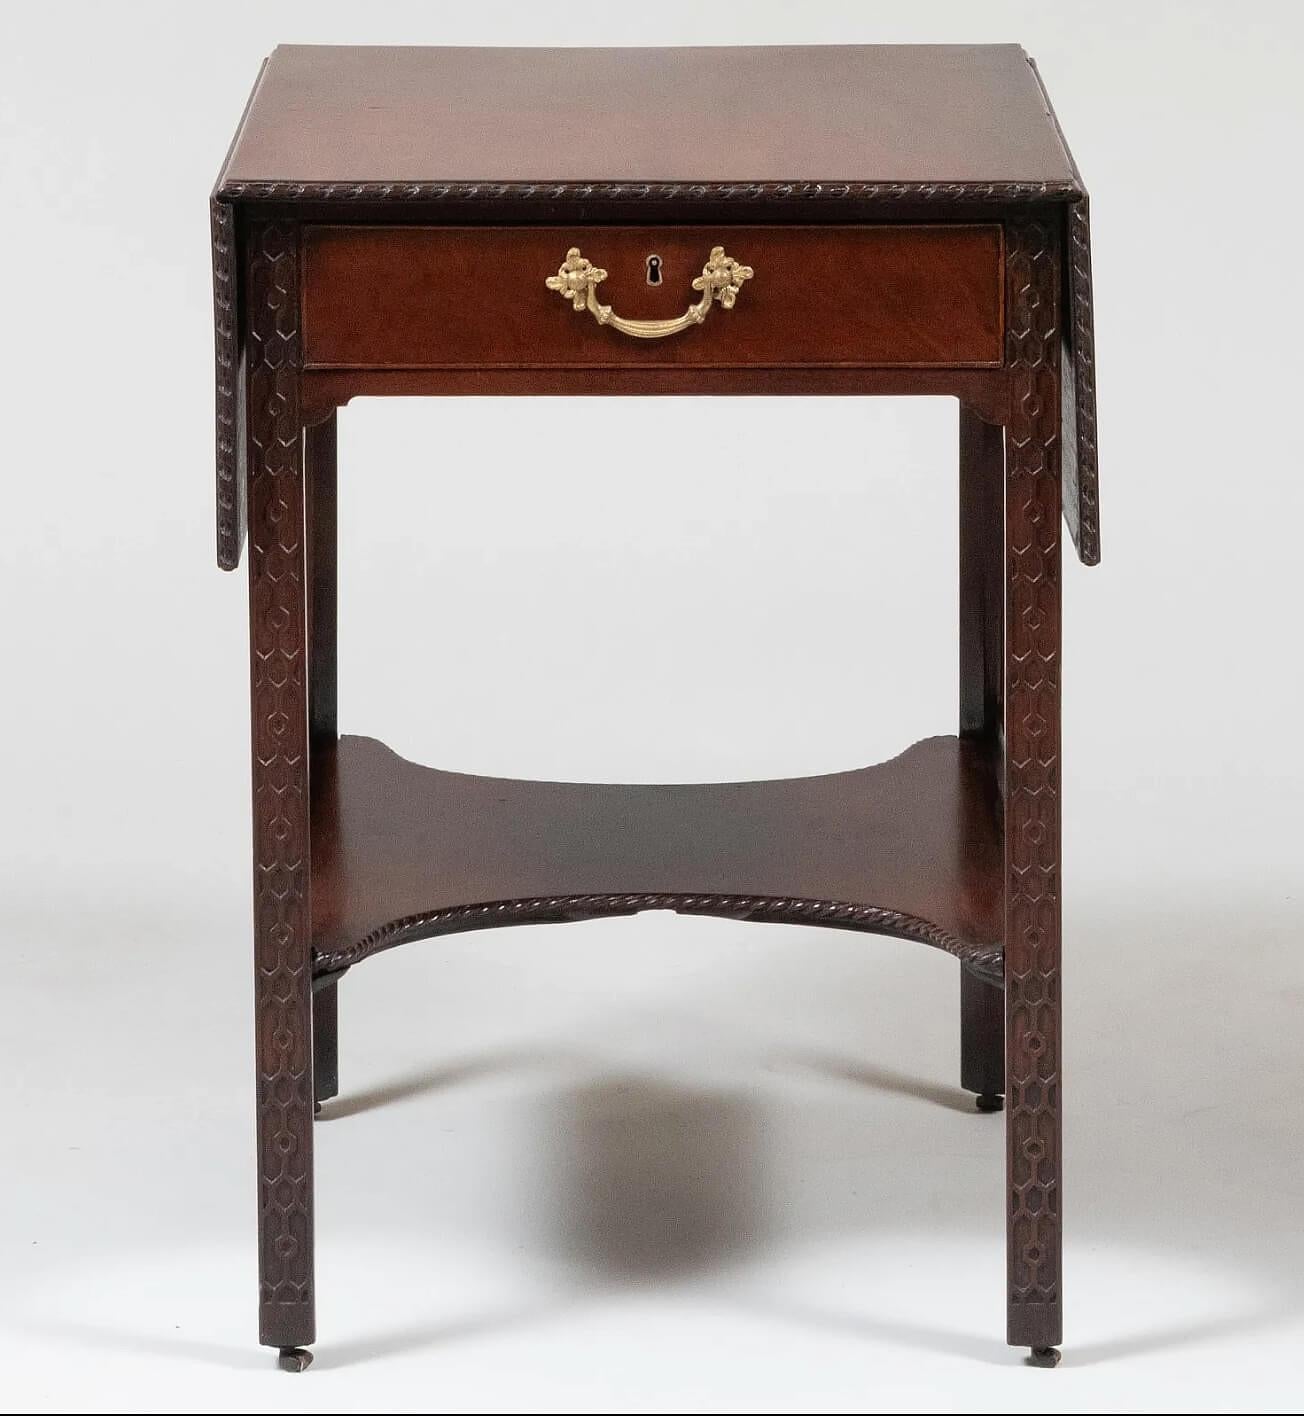 Chinese Chippendale English Georgian Chippendale Mahogany Double-Sided Pembroke Table, circa 1760 For Sale